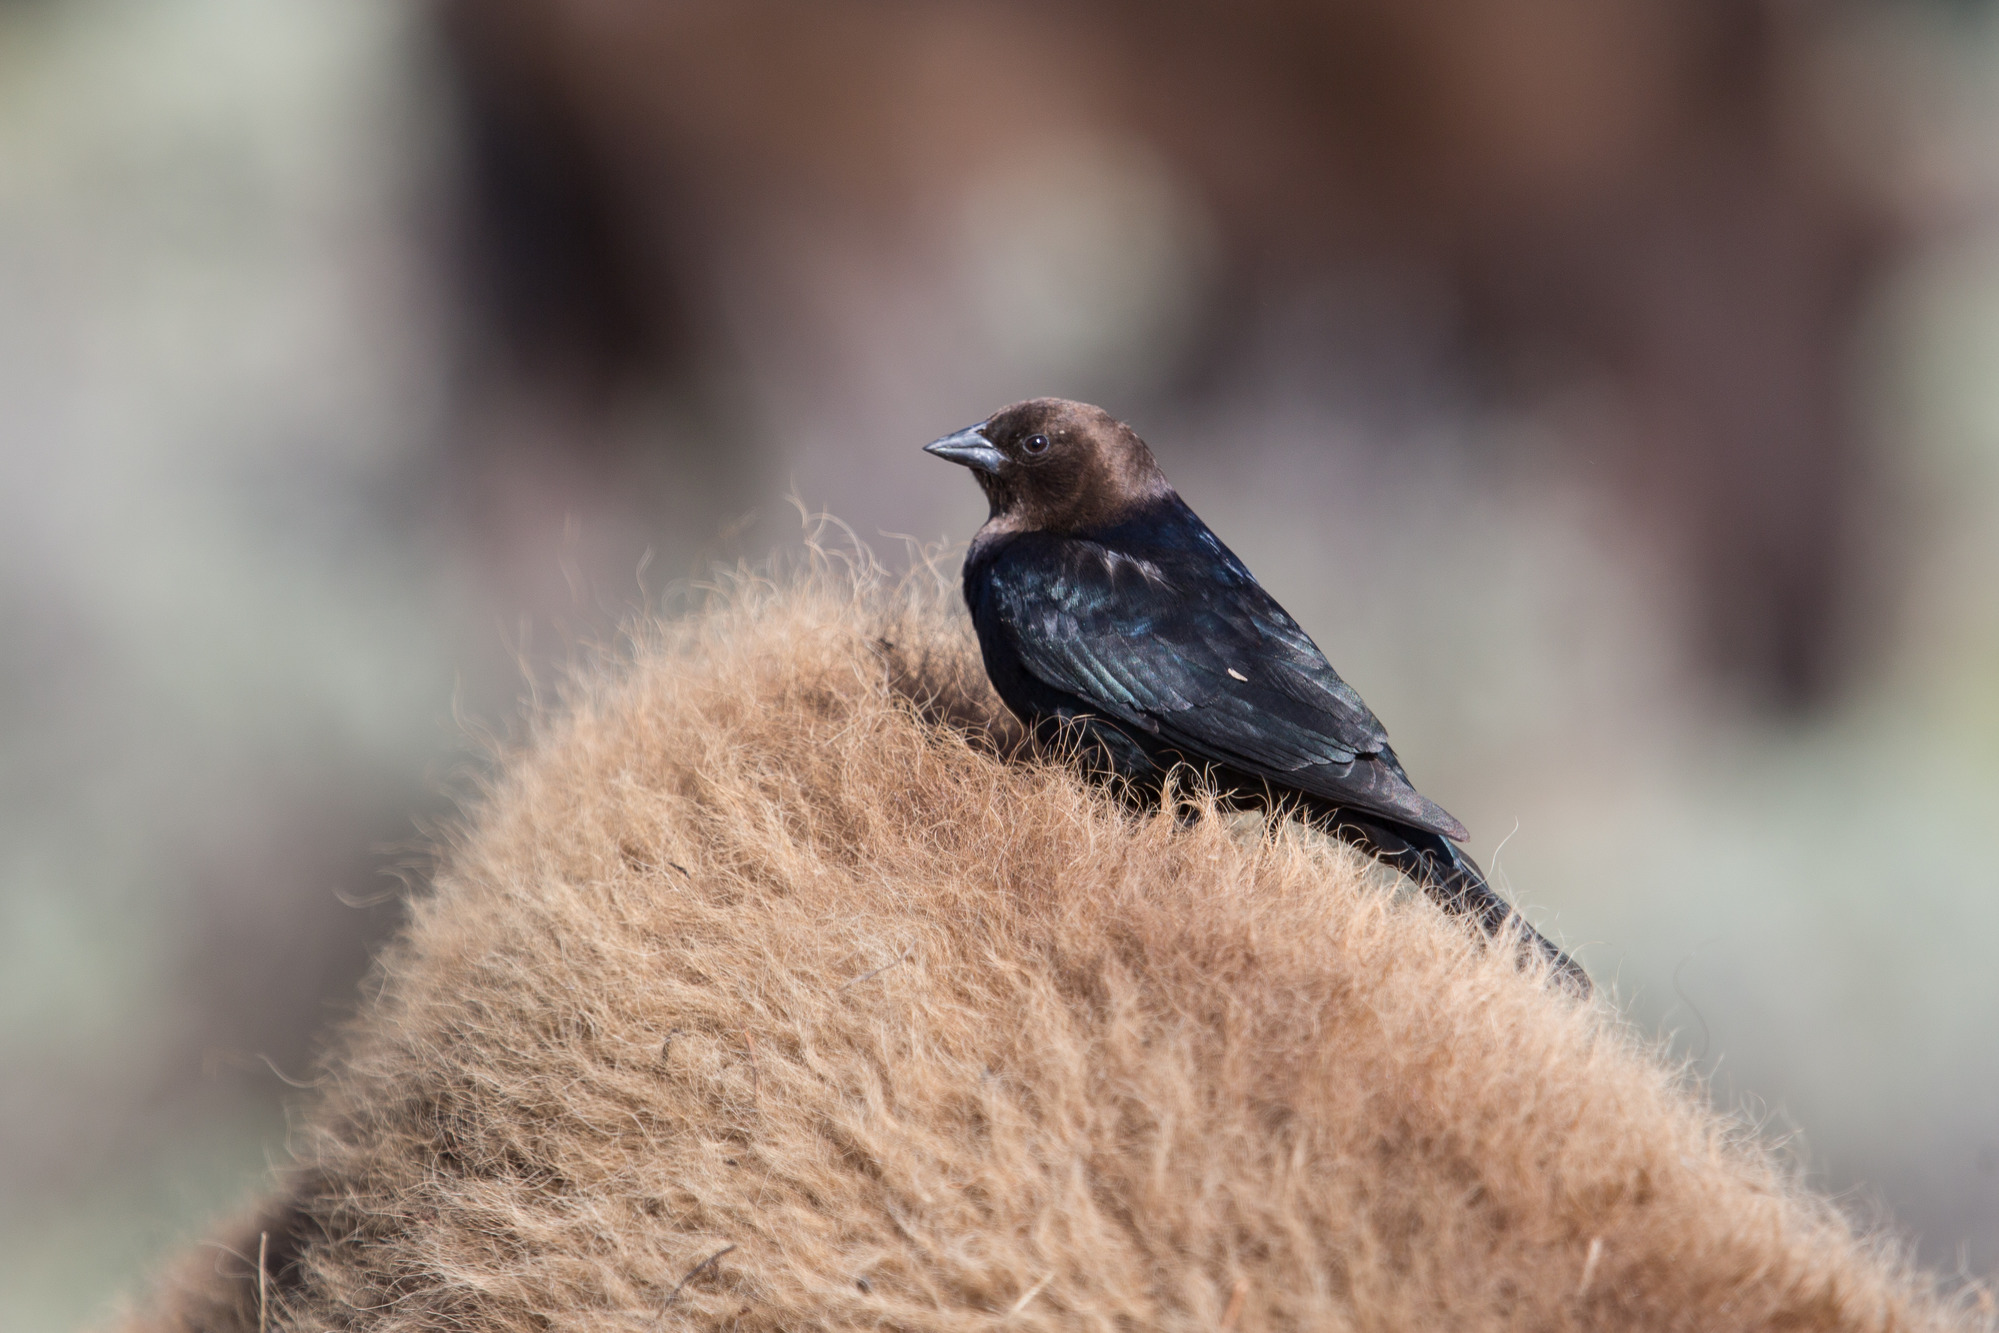 Close up of cowbird in a bison's fur